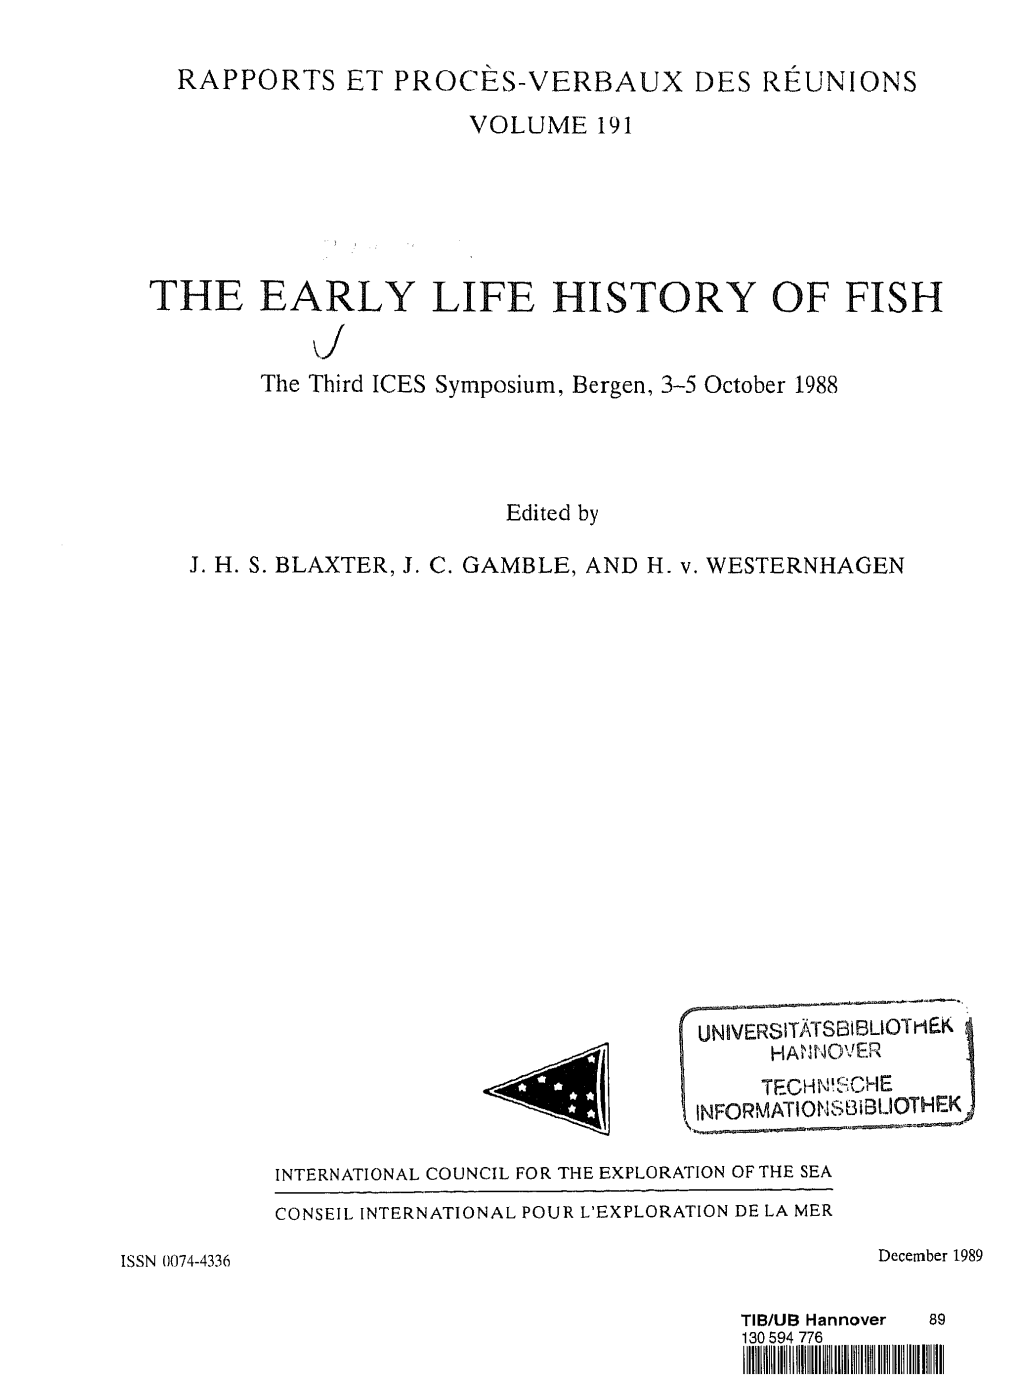 EARLY LIFE HISTORY of FISH J the Third ICES Symposium, Bergen, 3-5 October 1988